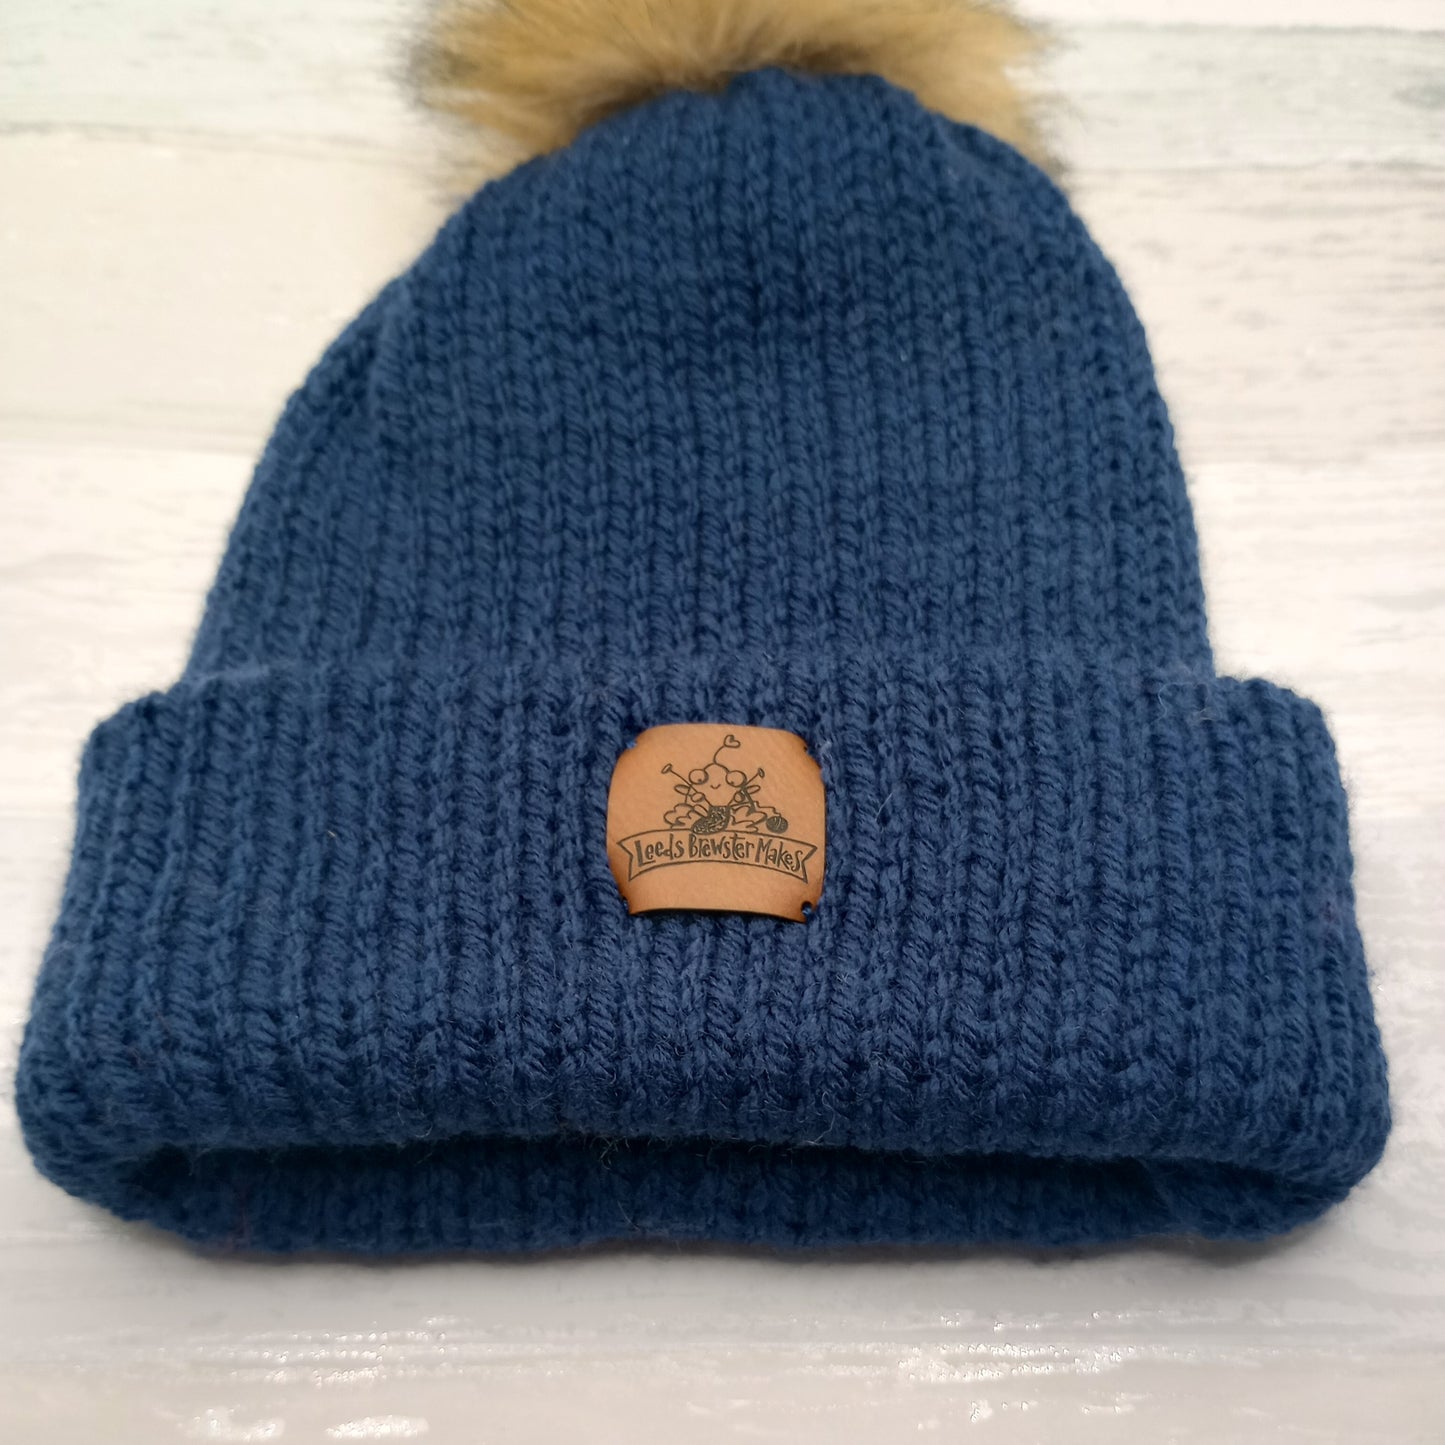 Knitted Navy Hat with a Pompom